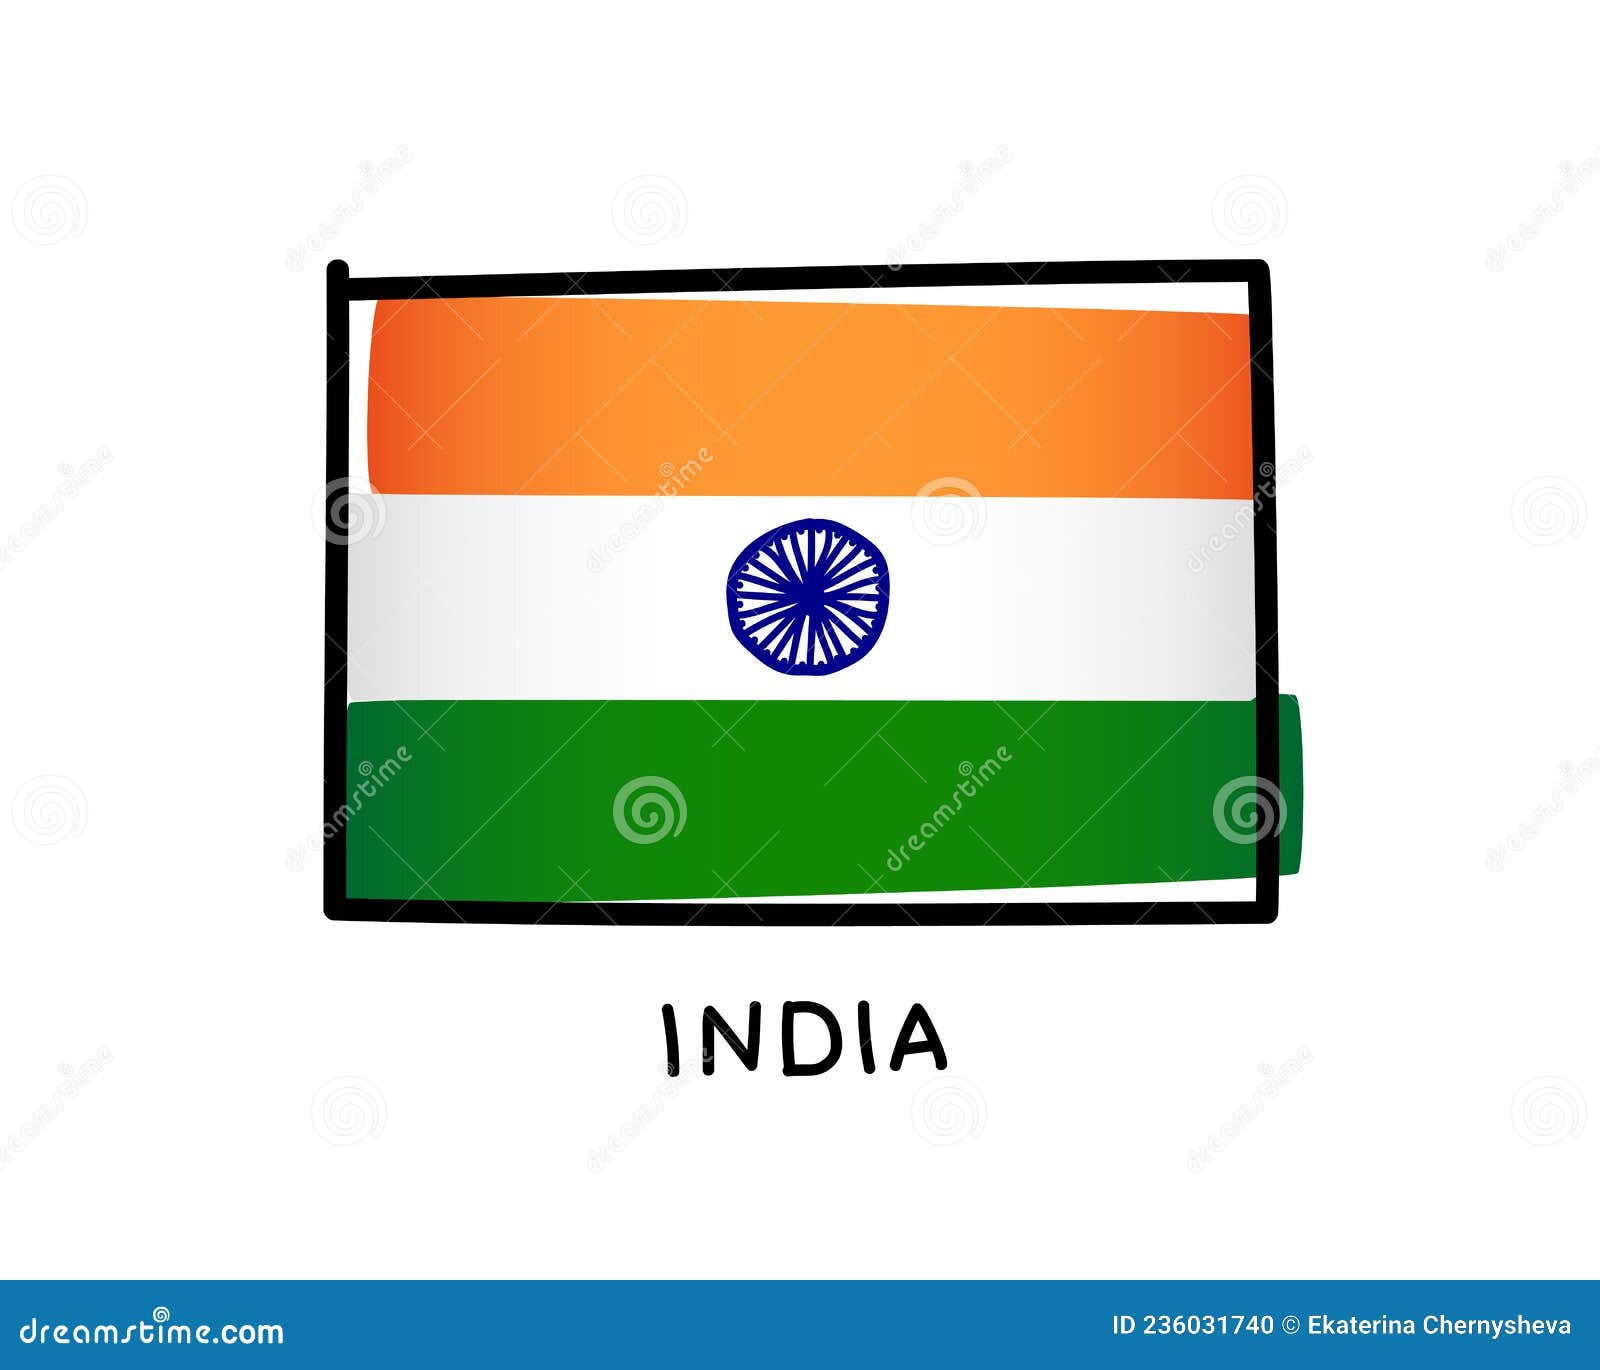 Tiranga Image Hd Png, Transparent Png is pure and creative PNG image  uploaded by Designer. To search more fr… | Text on photo, Photo clipart,  Tiranga png background